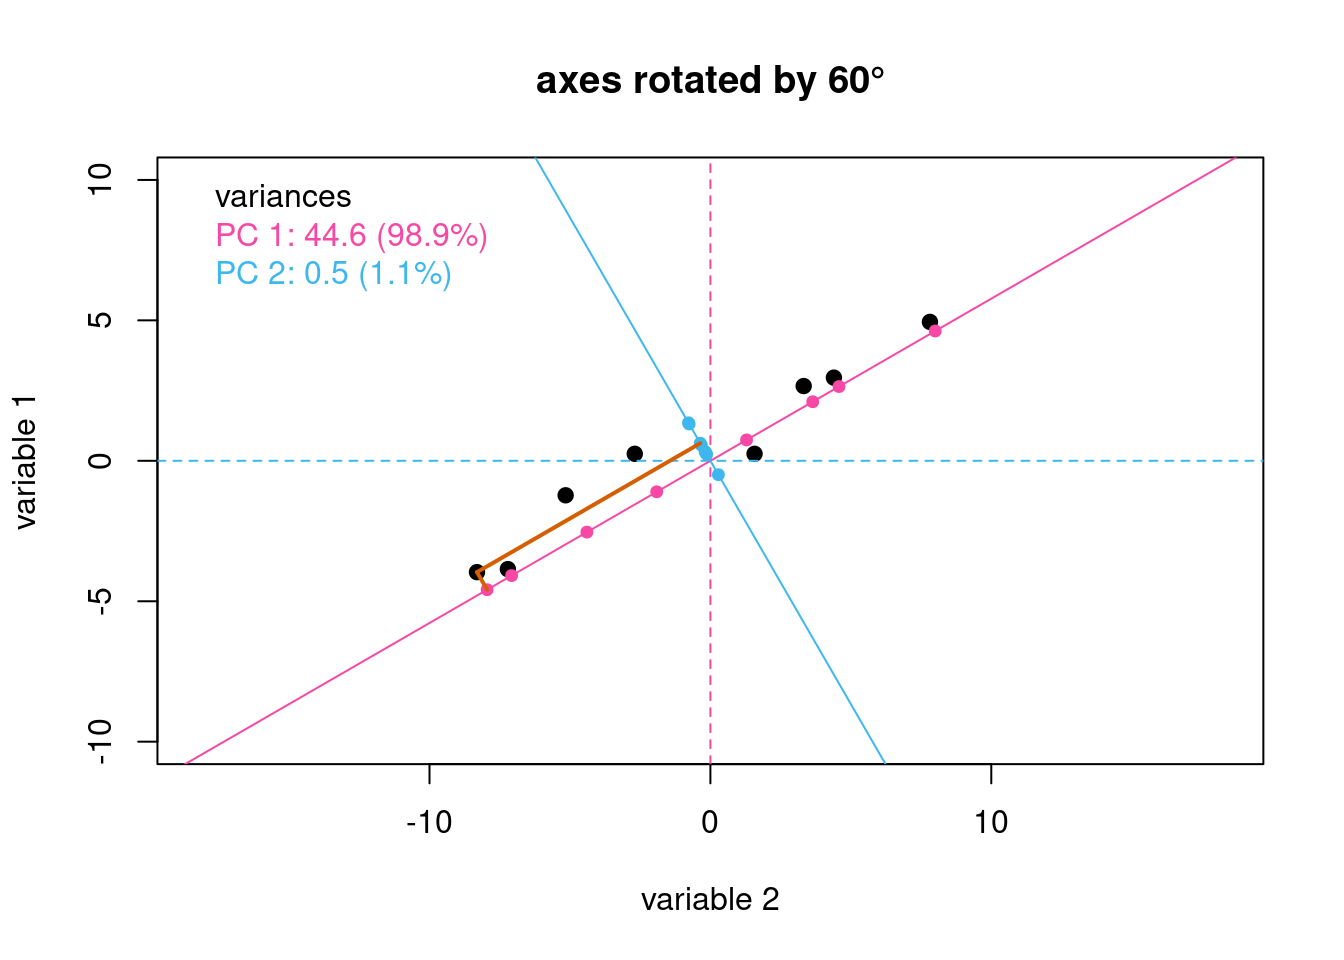 Rotating the original axes by 60$^\circ$ maximizes the variance along one of the two rotated axes; the line in pink is the first principal component axis and the line in blue is the second principal component axis.  The gray lines serve as a guide to illustrate the projections for one data point.